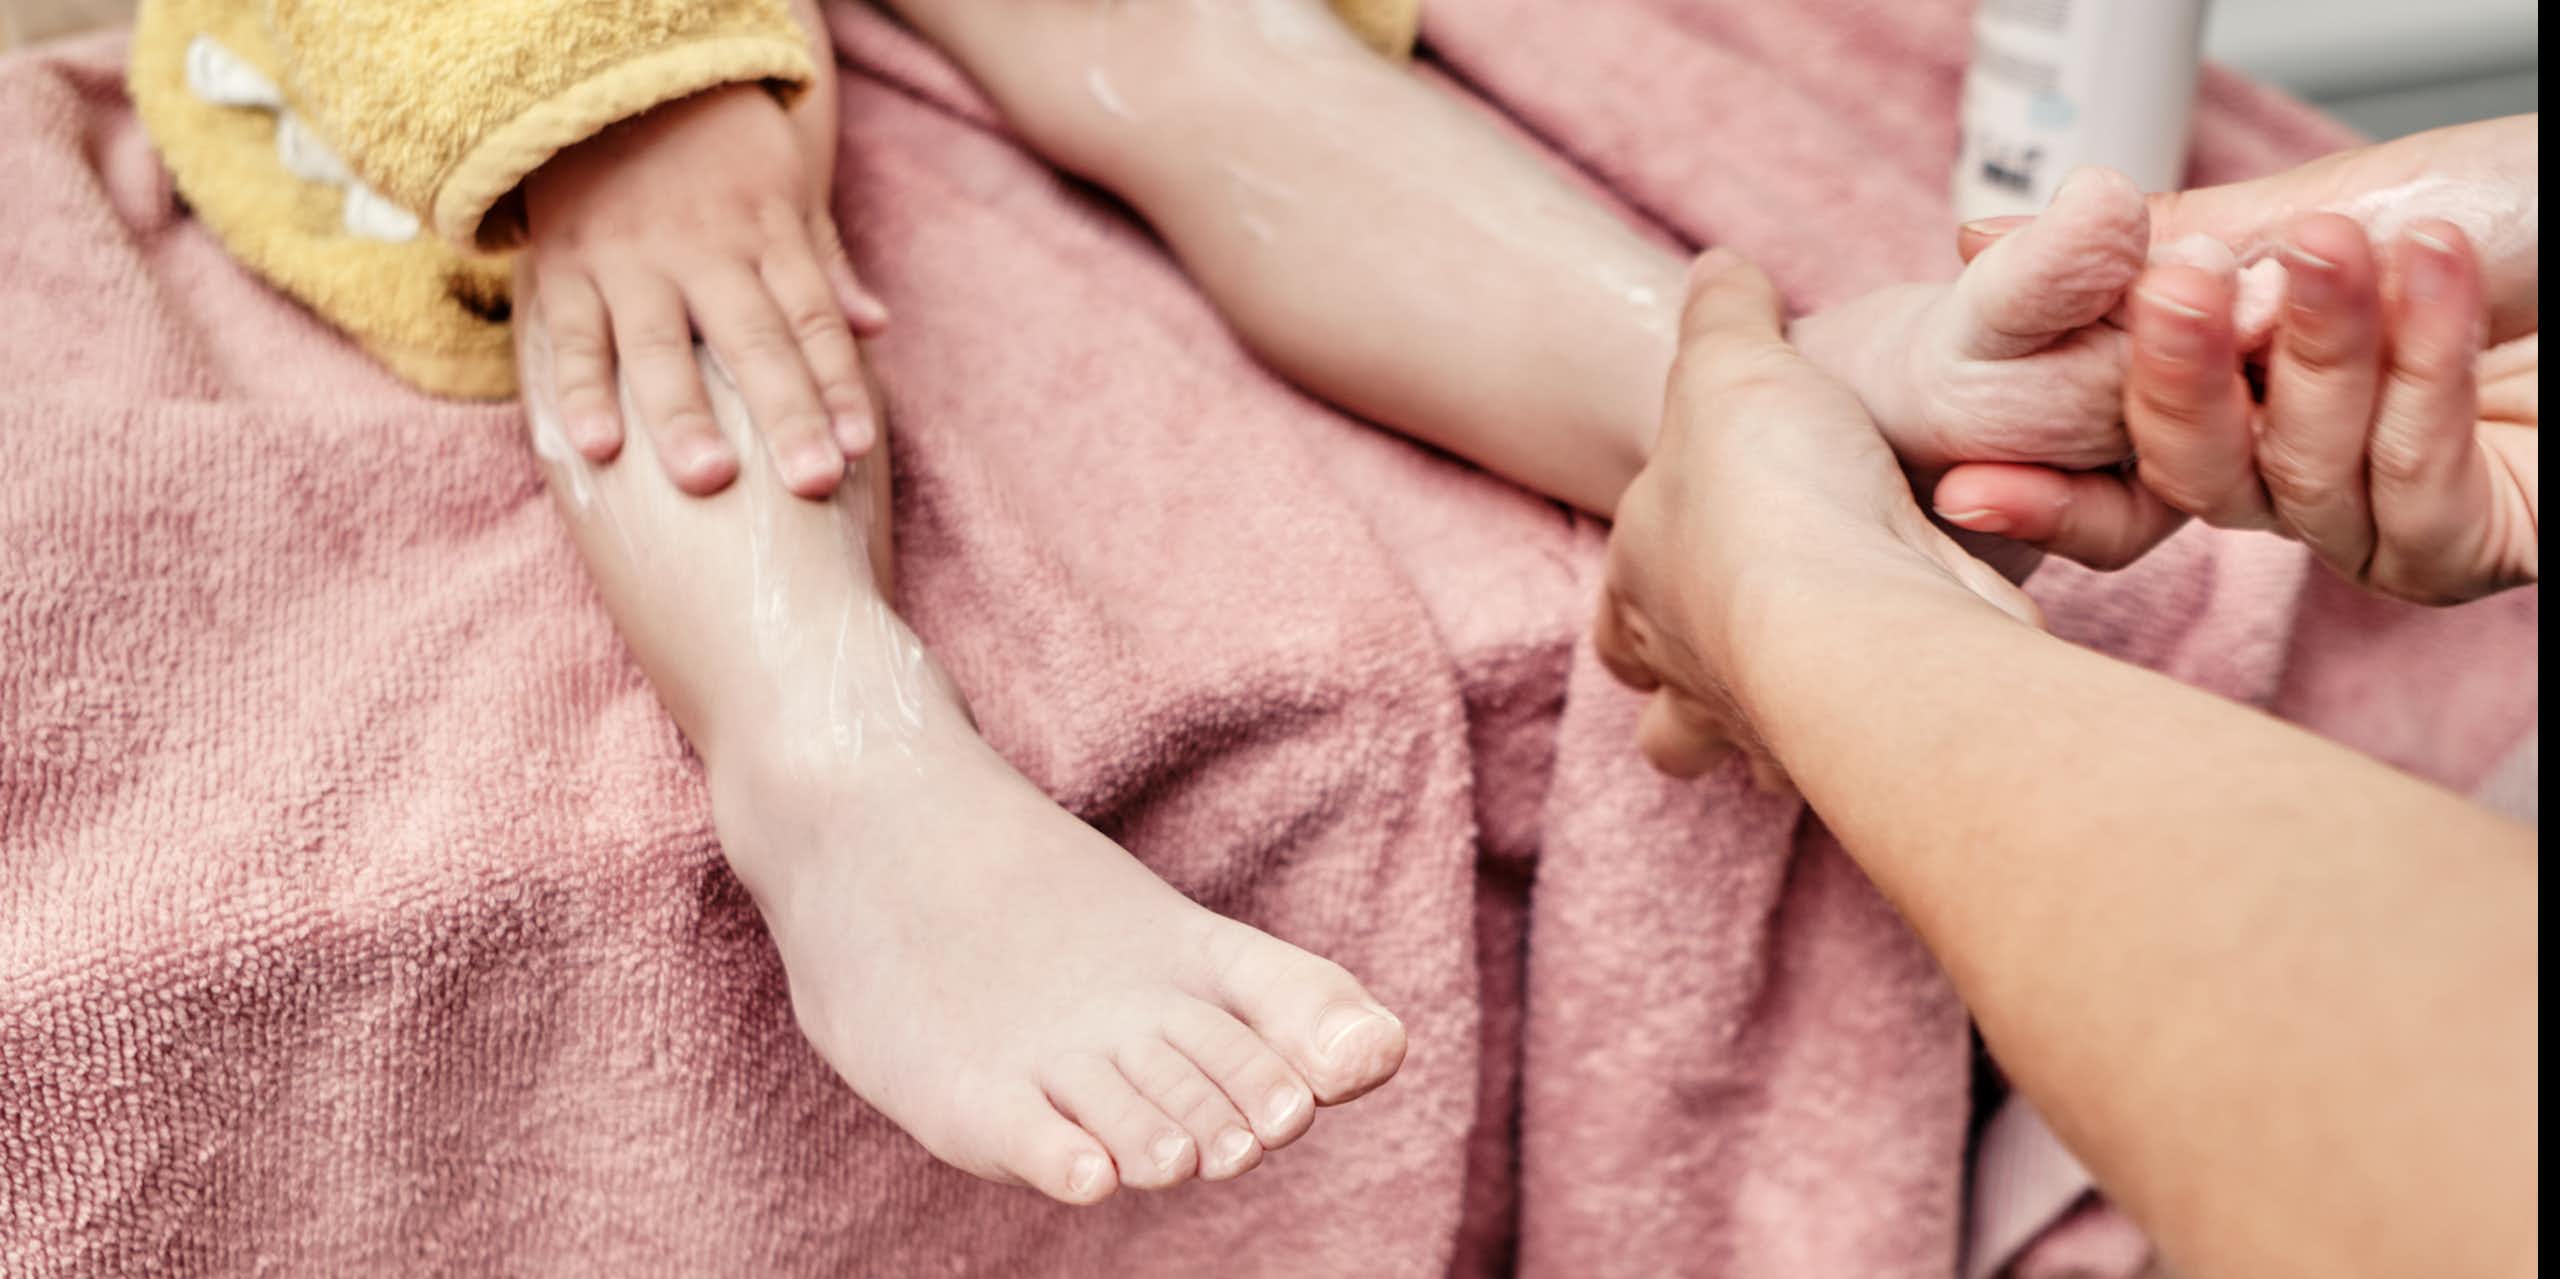 Close-up of legs of child sitting on a towel while another person slathers lotion on their foot.